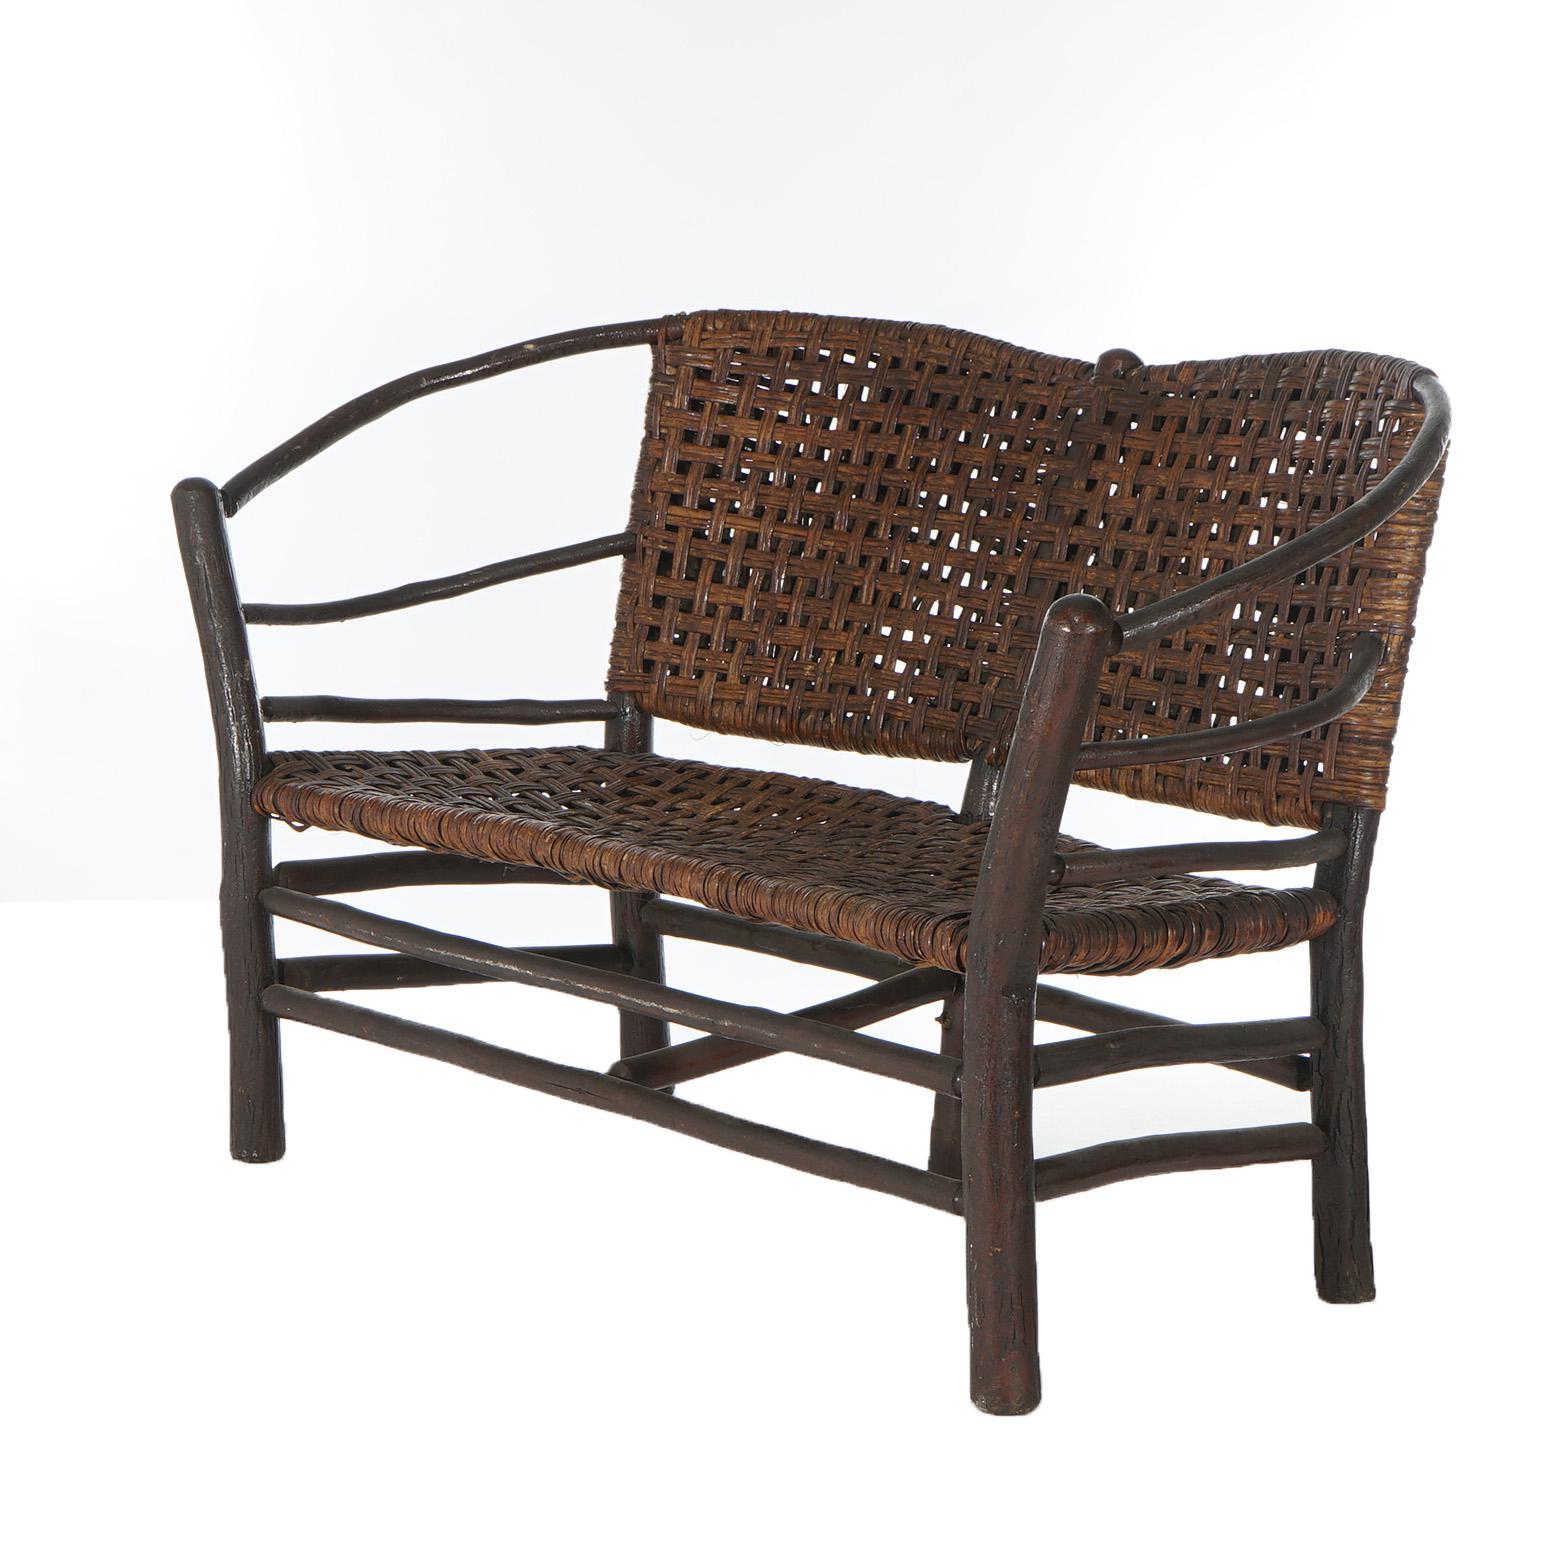 ***Ask About Reduced In-House Delivery Rates - Reliable Professional Service & Fully Insured***

Antique Adirondack Old Hickory Stick Form & Splint Settee C1920

Measures- 34''H x 55.5''W x 28.5''D; 15'' SH